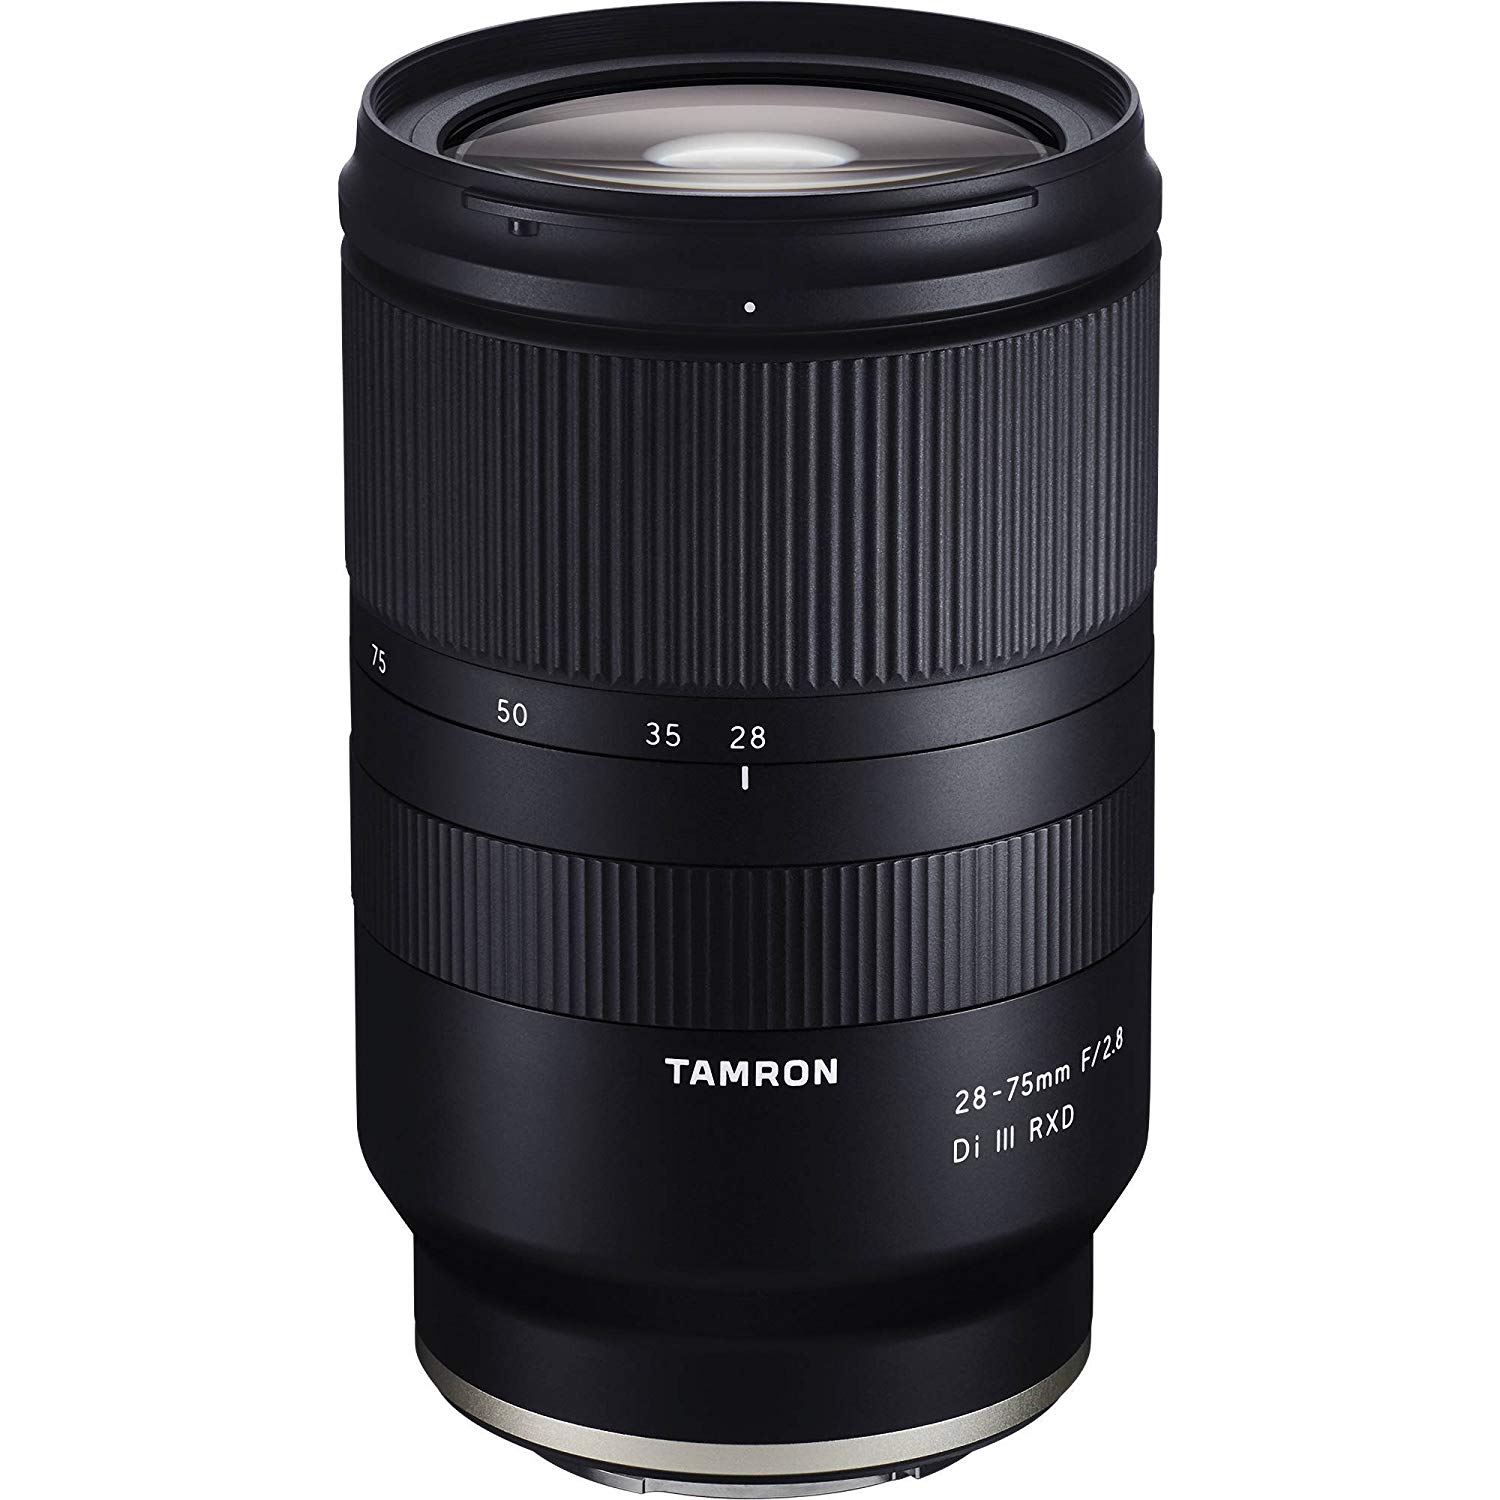 Tamron Objectif  Di III RXD 28-75mm f / 2.8 pour Sony E...